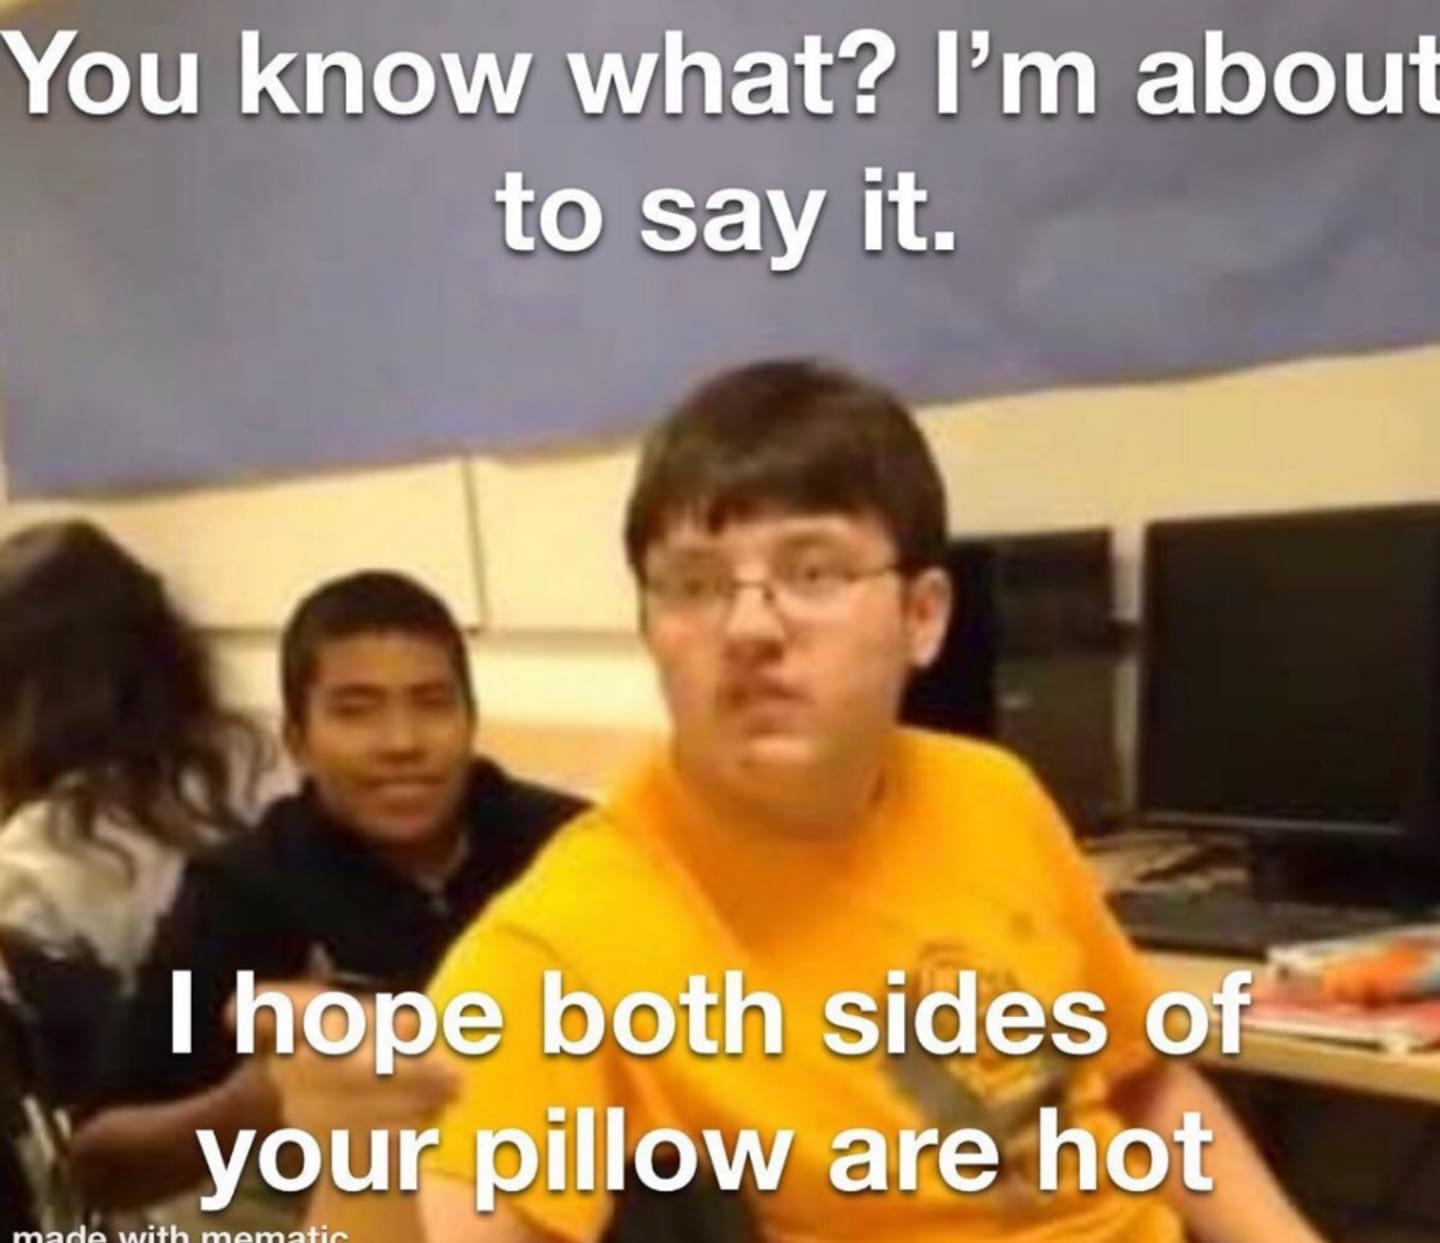 there i said it meme - You know what? I'm about to say it. I hope both sides of your pillow are hot made with mematic